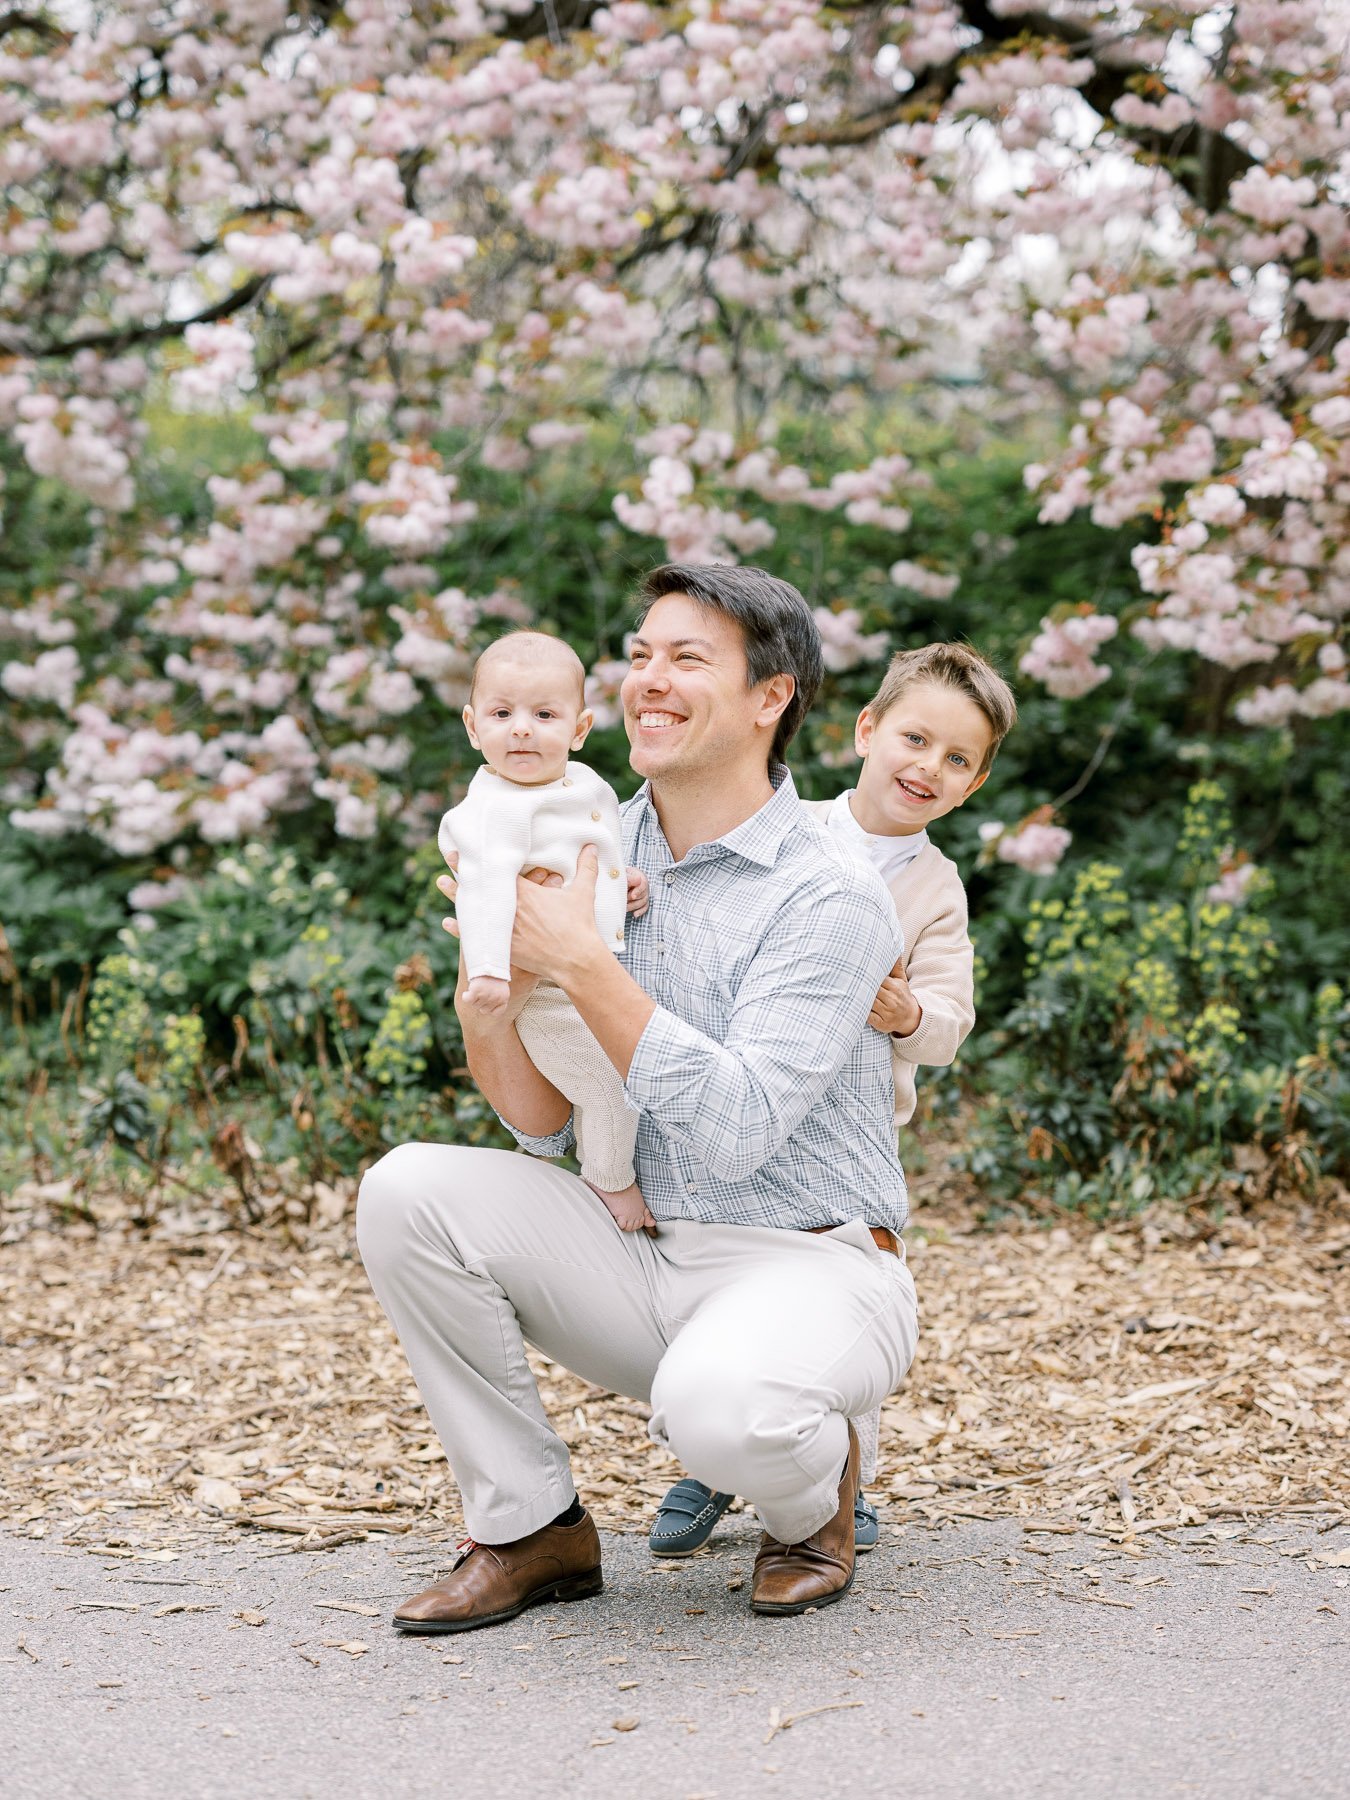 NYC Blossom family portraits by Michelle Lange Photography-11.jpg